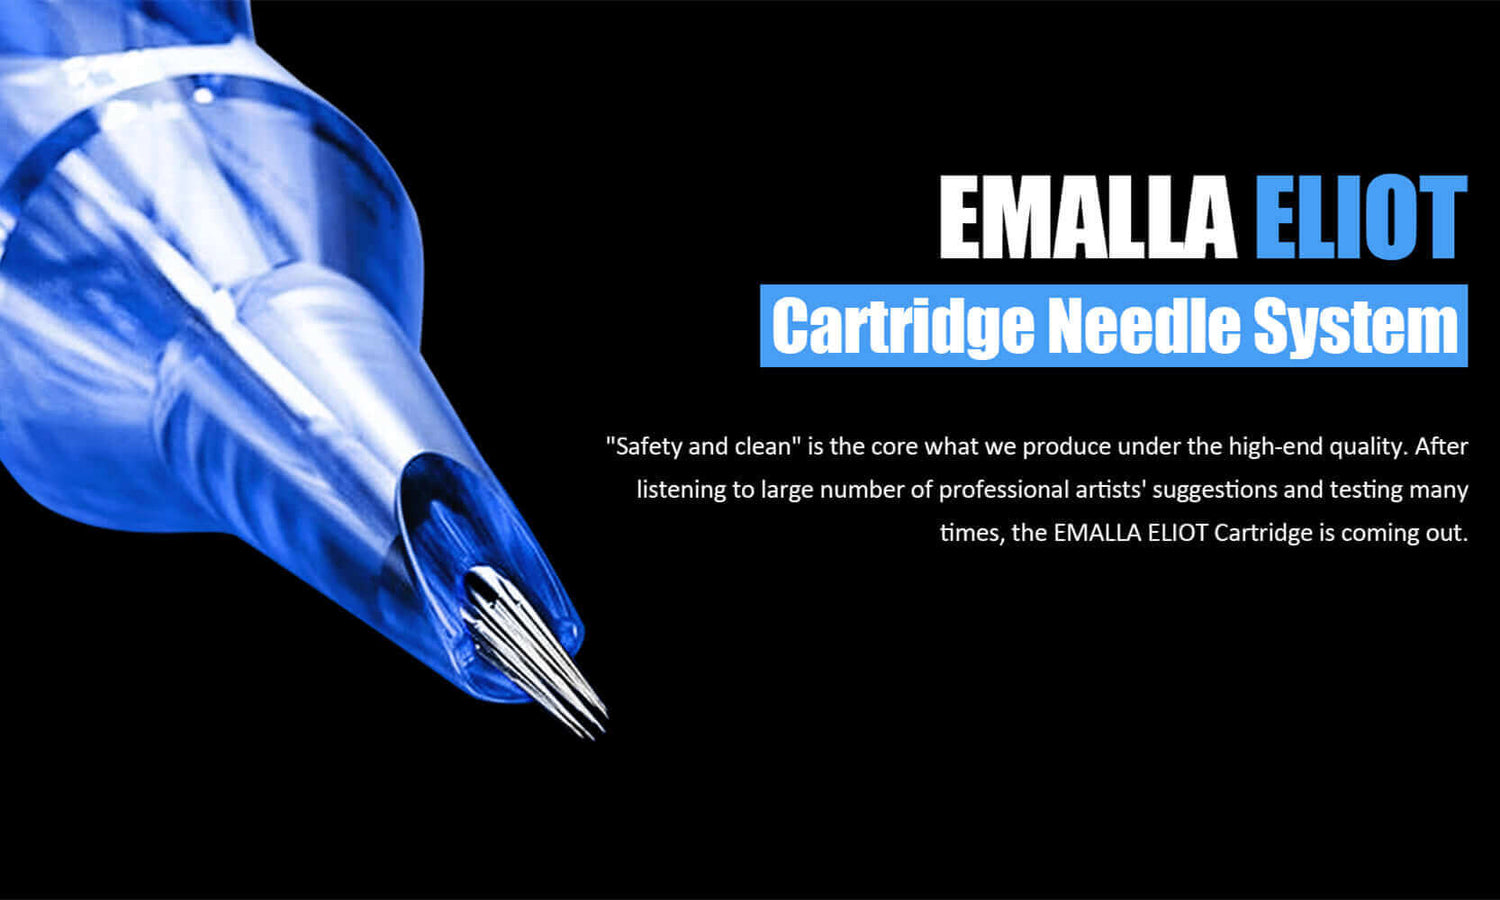 Safety and clean of EMALLA ELIOT cartridge needles with details of needle tips 